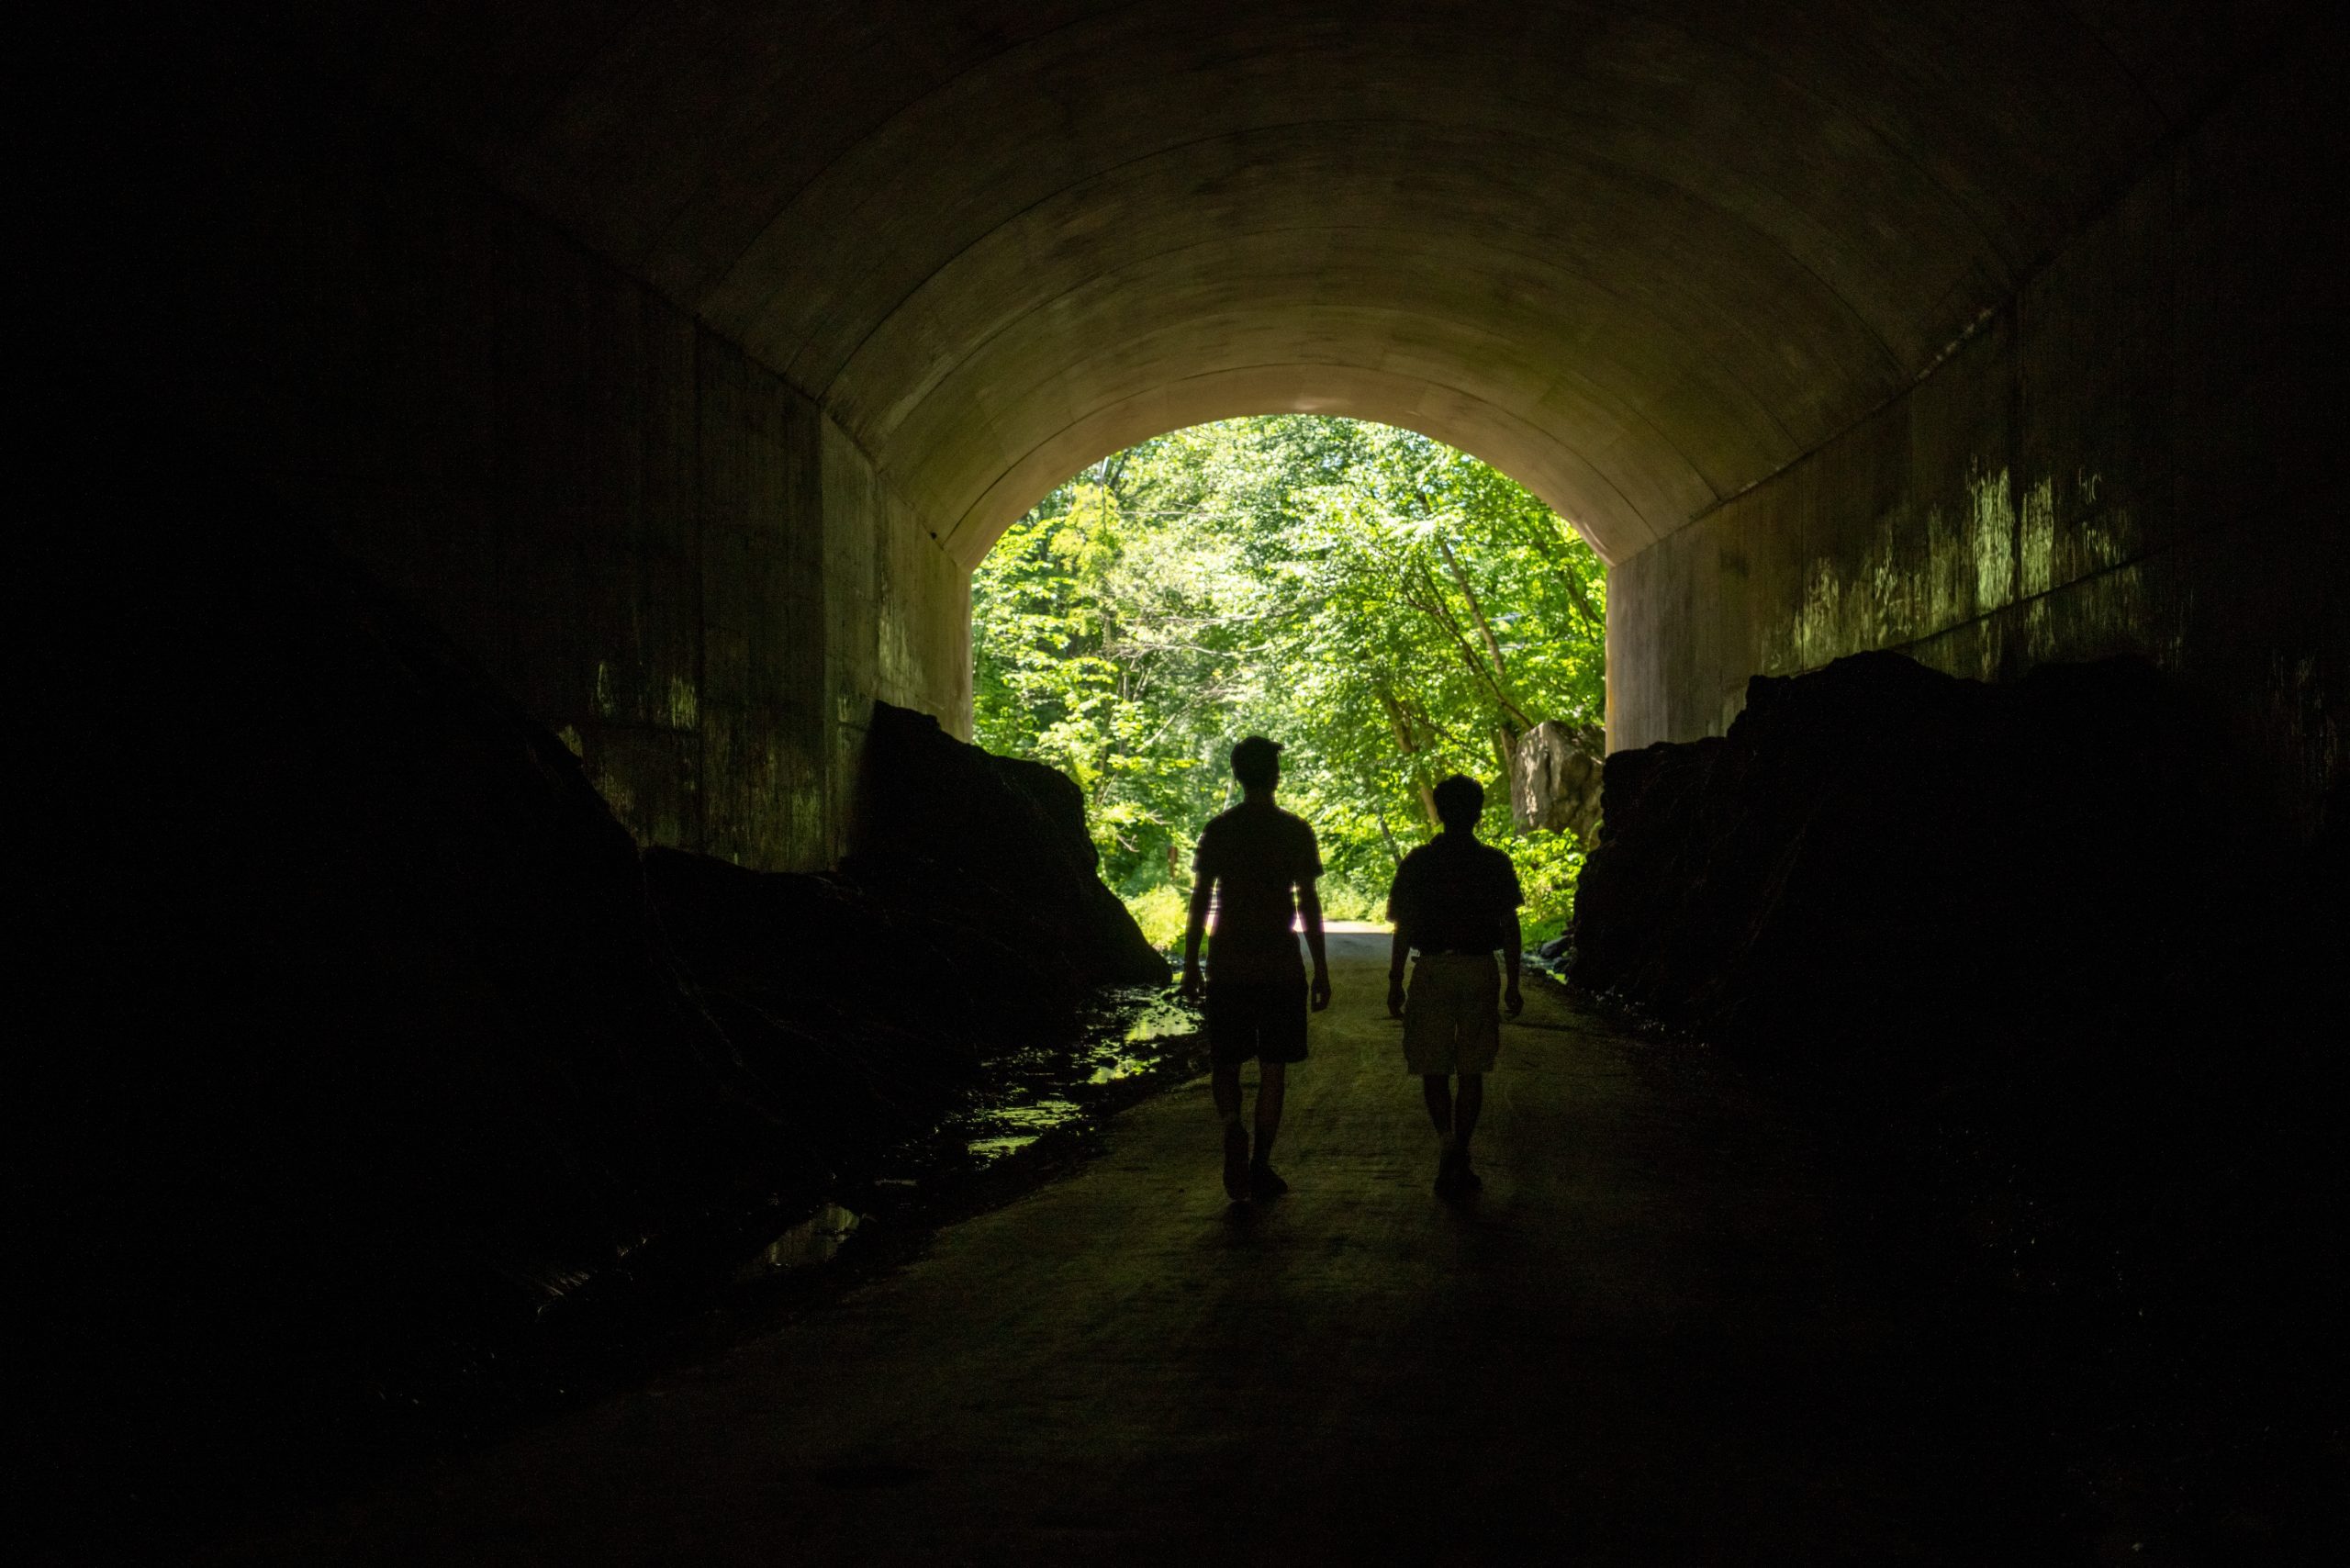 UConn students Robert Avena (left) and Sumeet Kadian (right) walk through the dark Hop River Trail tunnel in Bolton Notch State Park that runs under Interstate 384 in Bolton, CT on June 25, 2022. The duo conducted a feasibility study during their first-year Service Learning class that recommended the installation of lighting through the tunnel, which the Connecticut Department of Transportation and Department Energy and Environmental Protection are working to implement. (Sydney Herdle/UConn Photo)